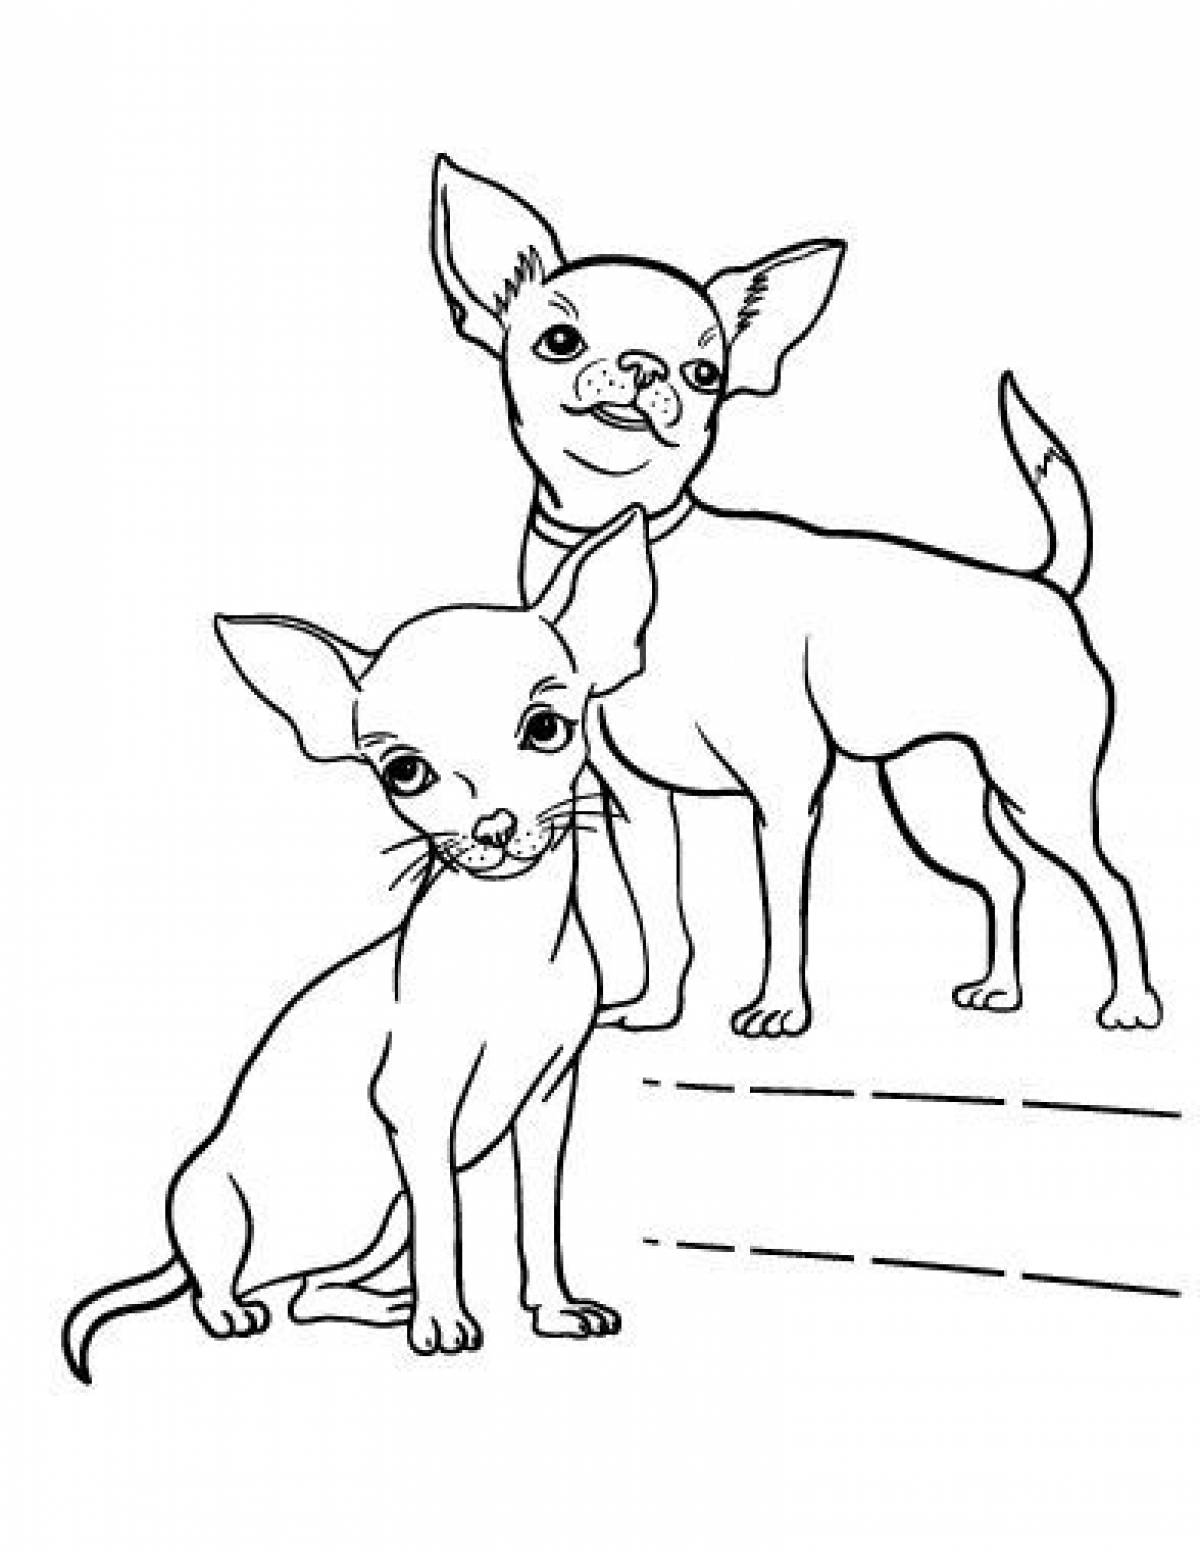 Chihuahua coloring page